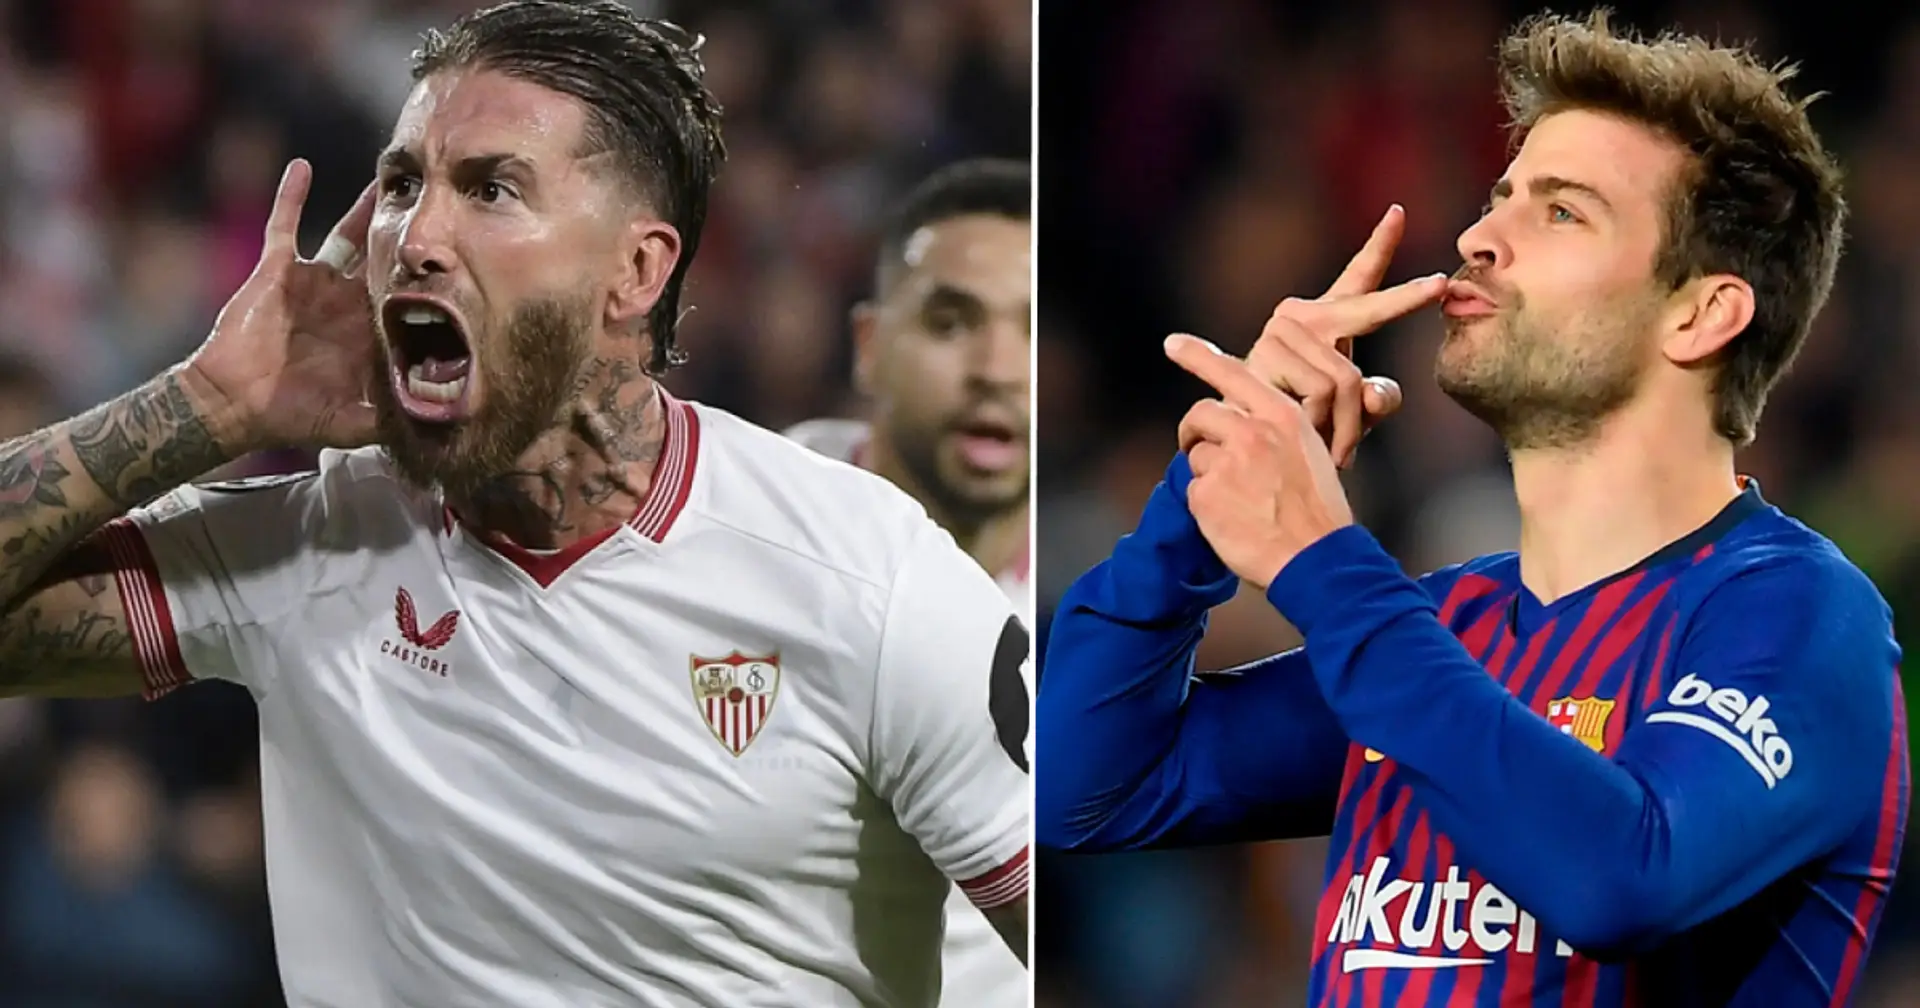 Sergio Ramos equals Pique's Champions League record, but Sevilla disappoints Spain